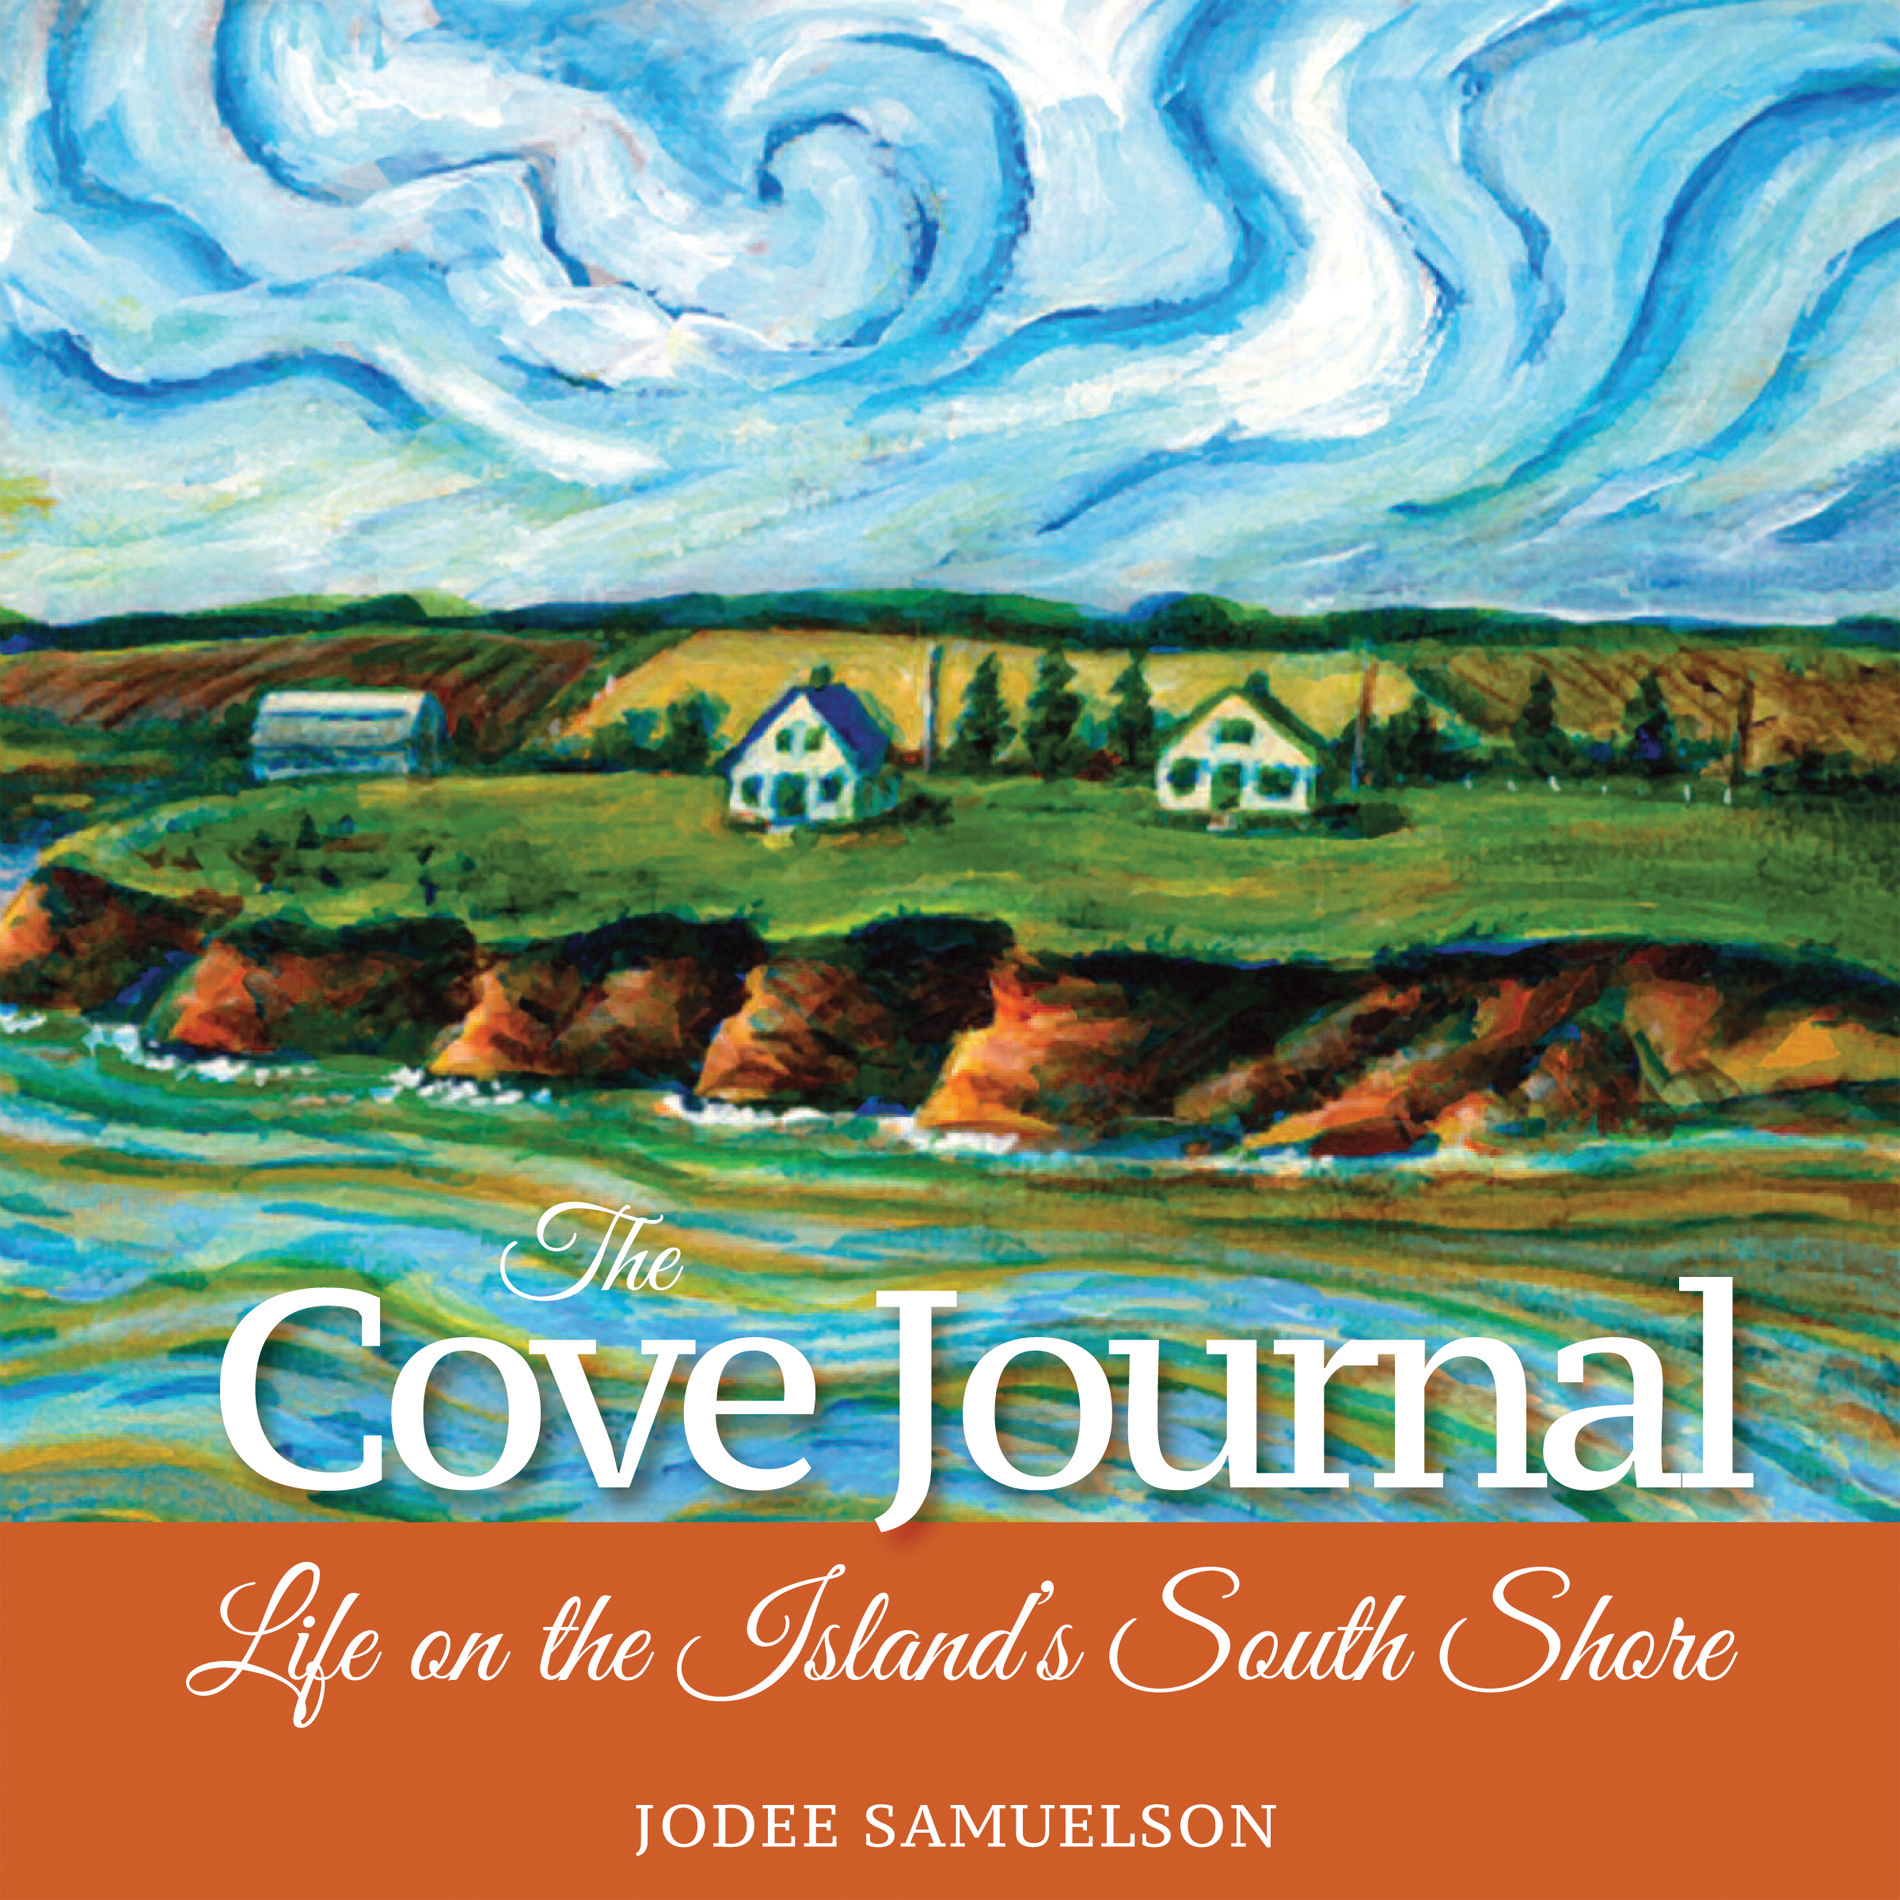 The Cove Journal